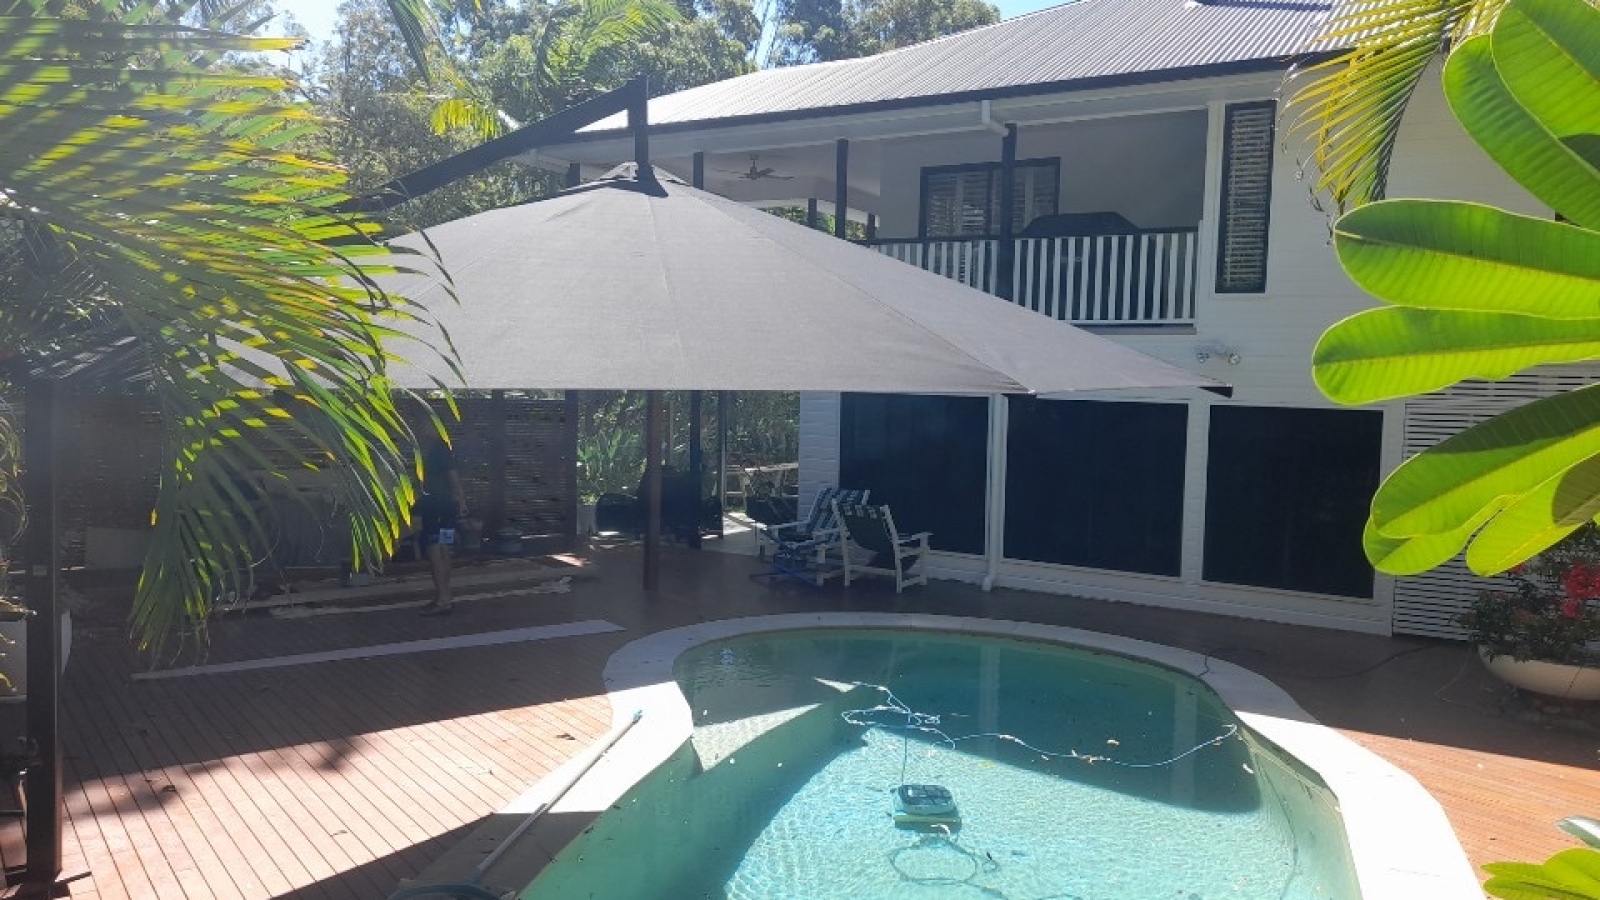 Protecting Your Pool Area with High-Quality Outdoor Giant Umbrellas